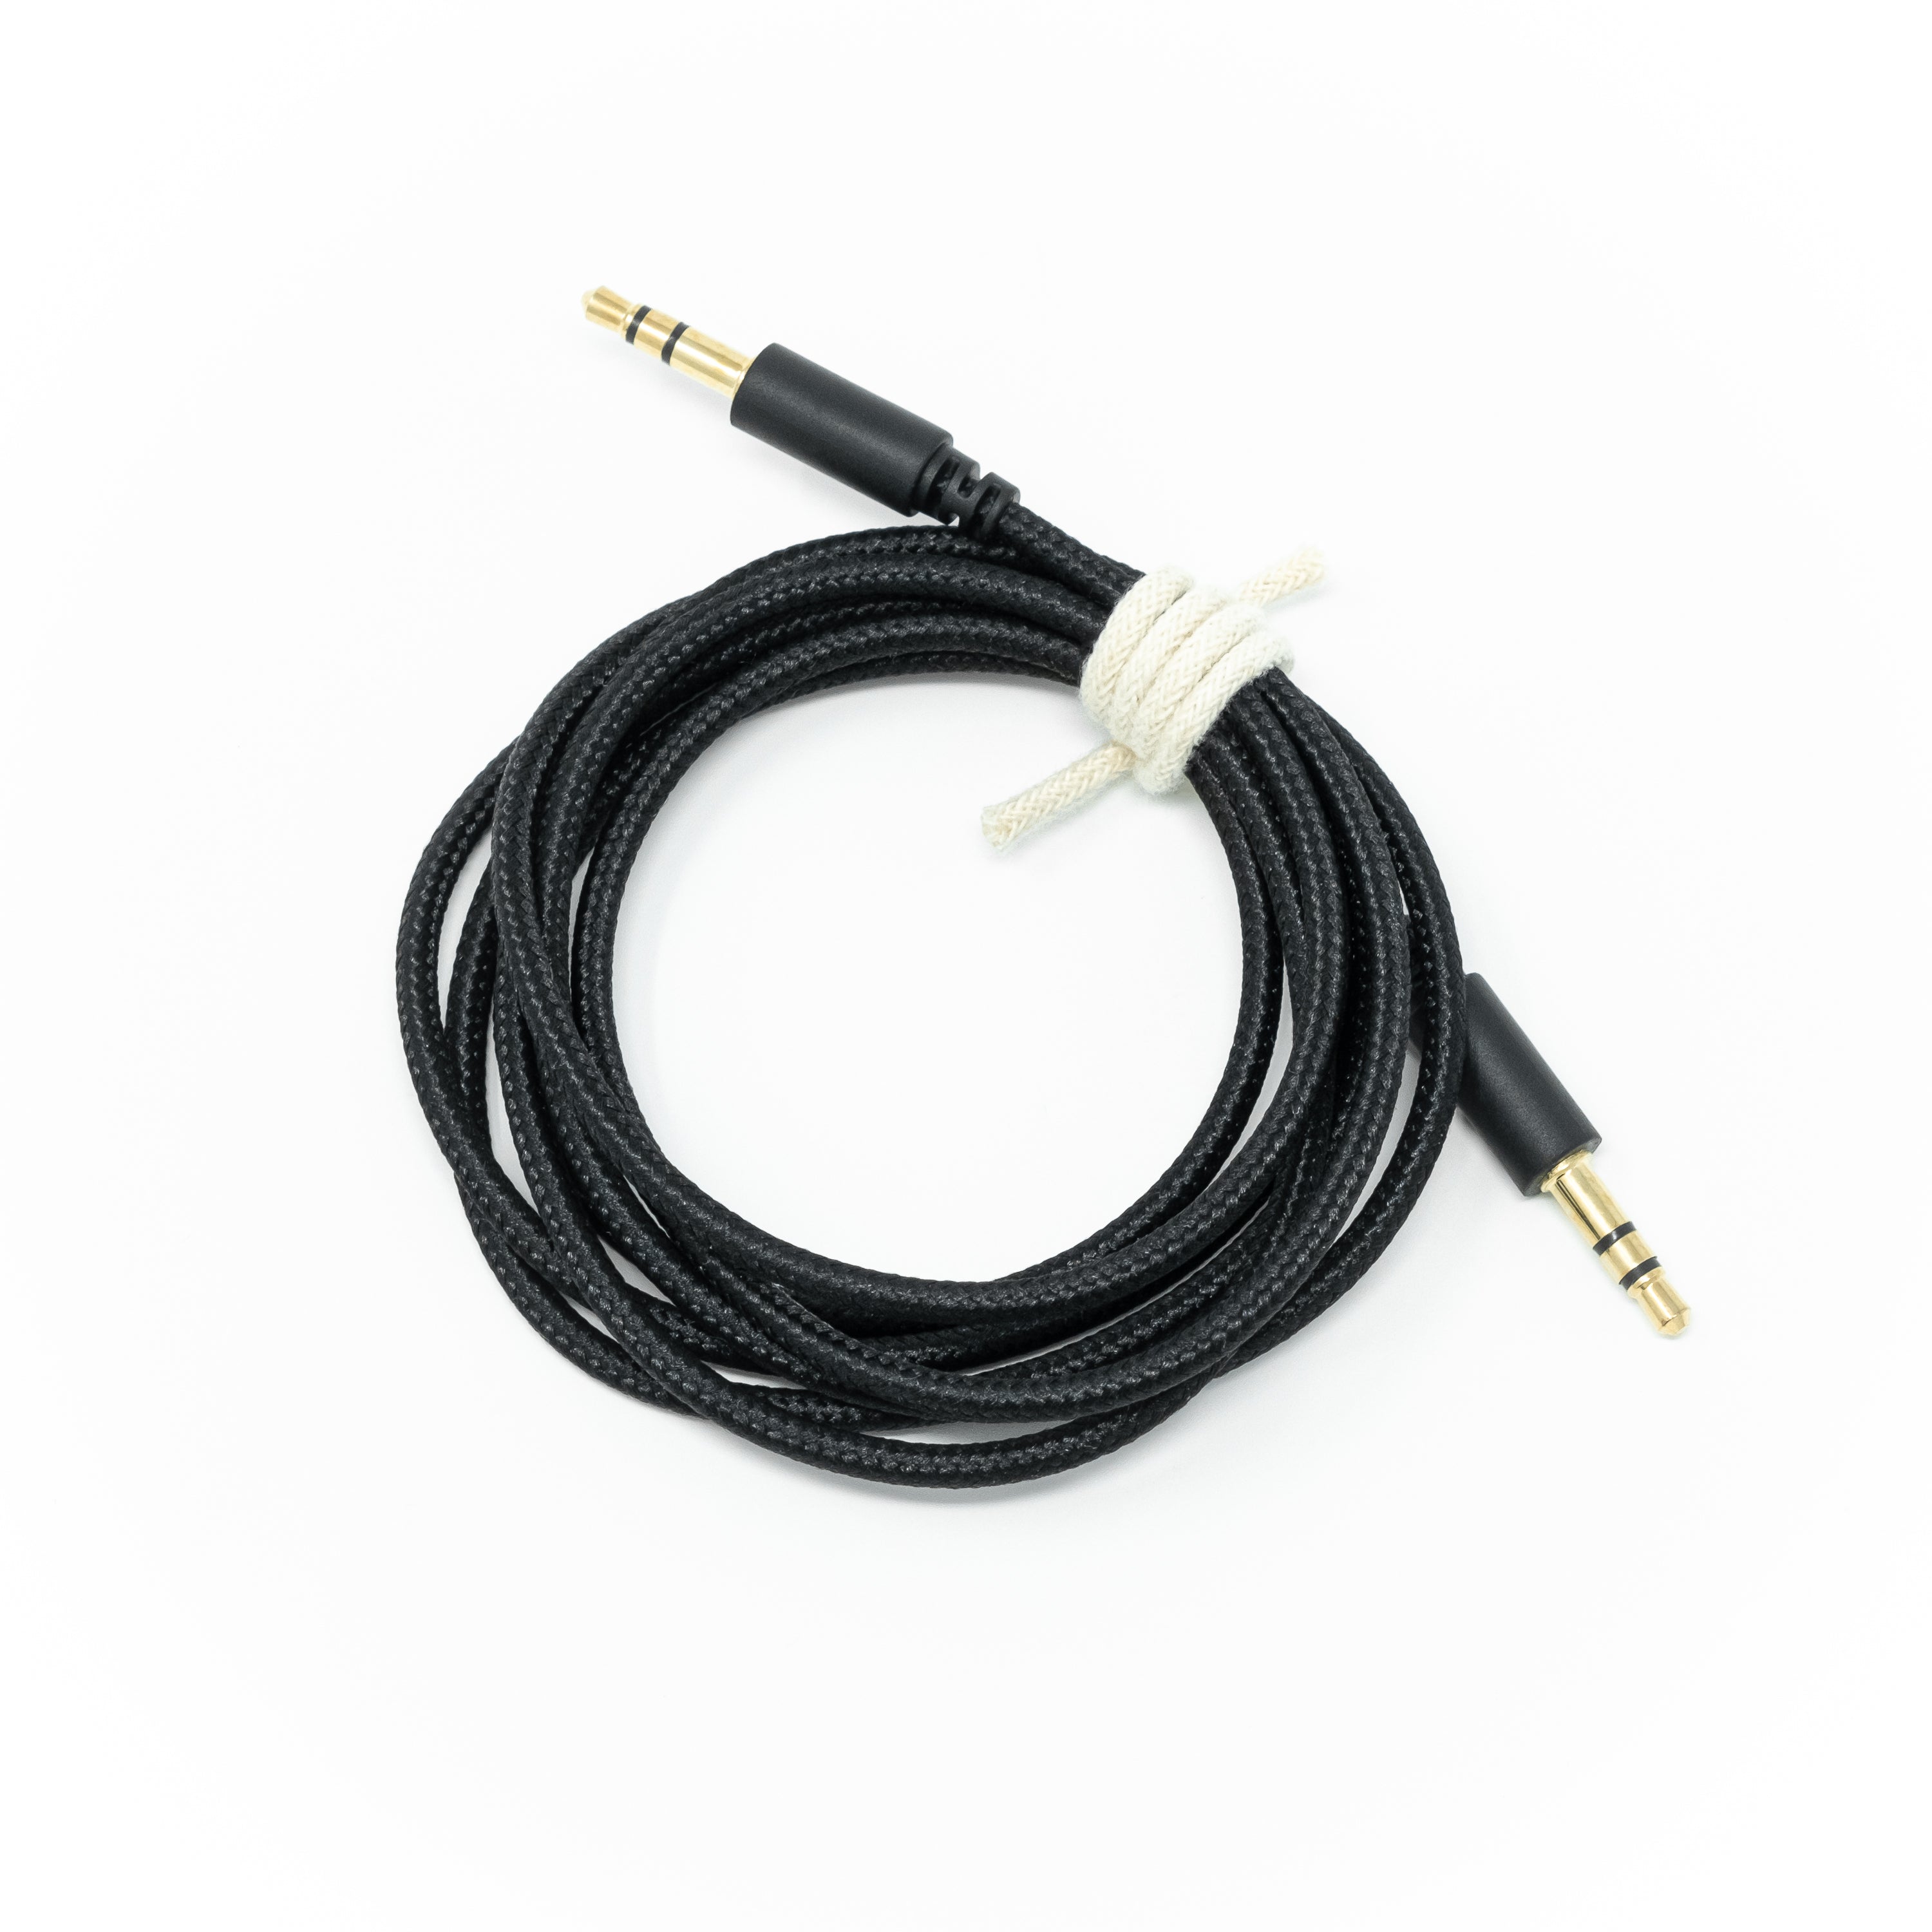 Headphone cable for ov21/On1/On2